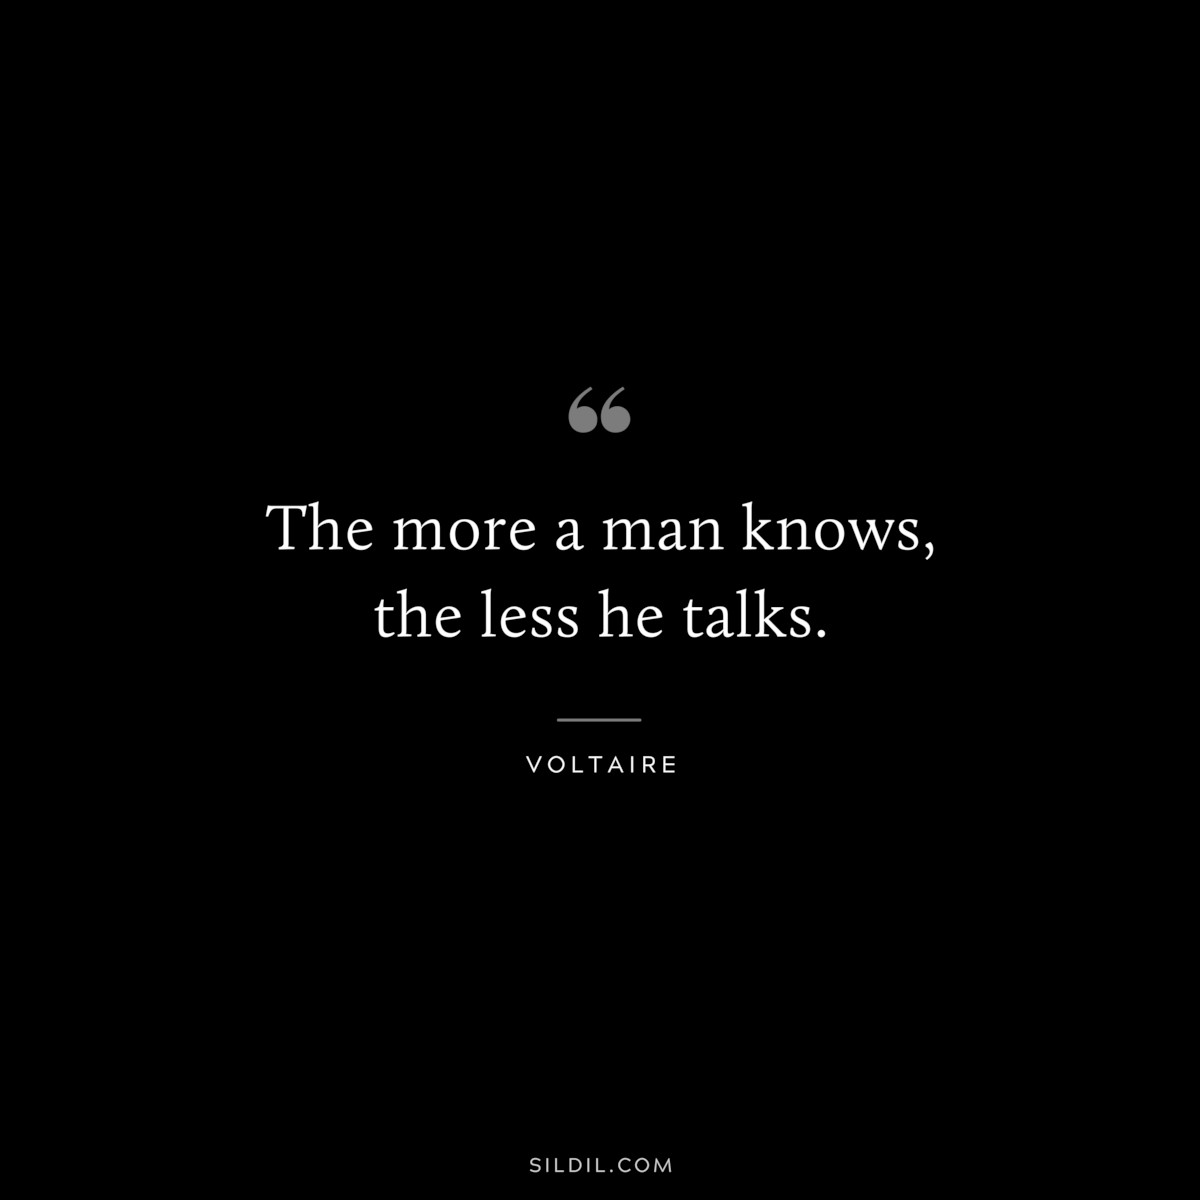 The more a man knows, the less he talks. ― Voltaire